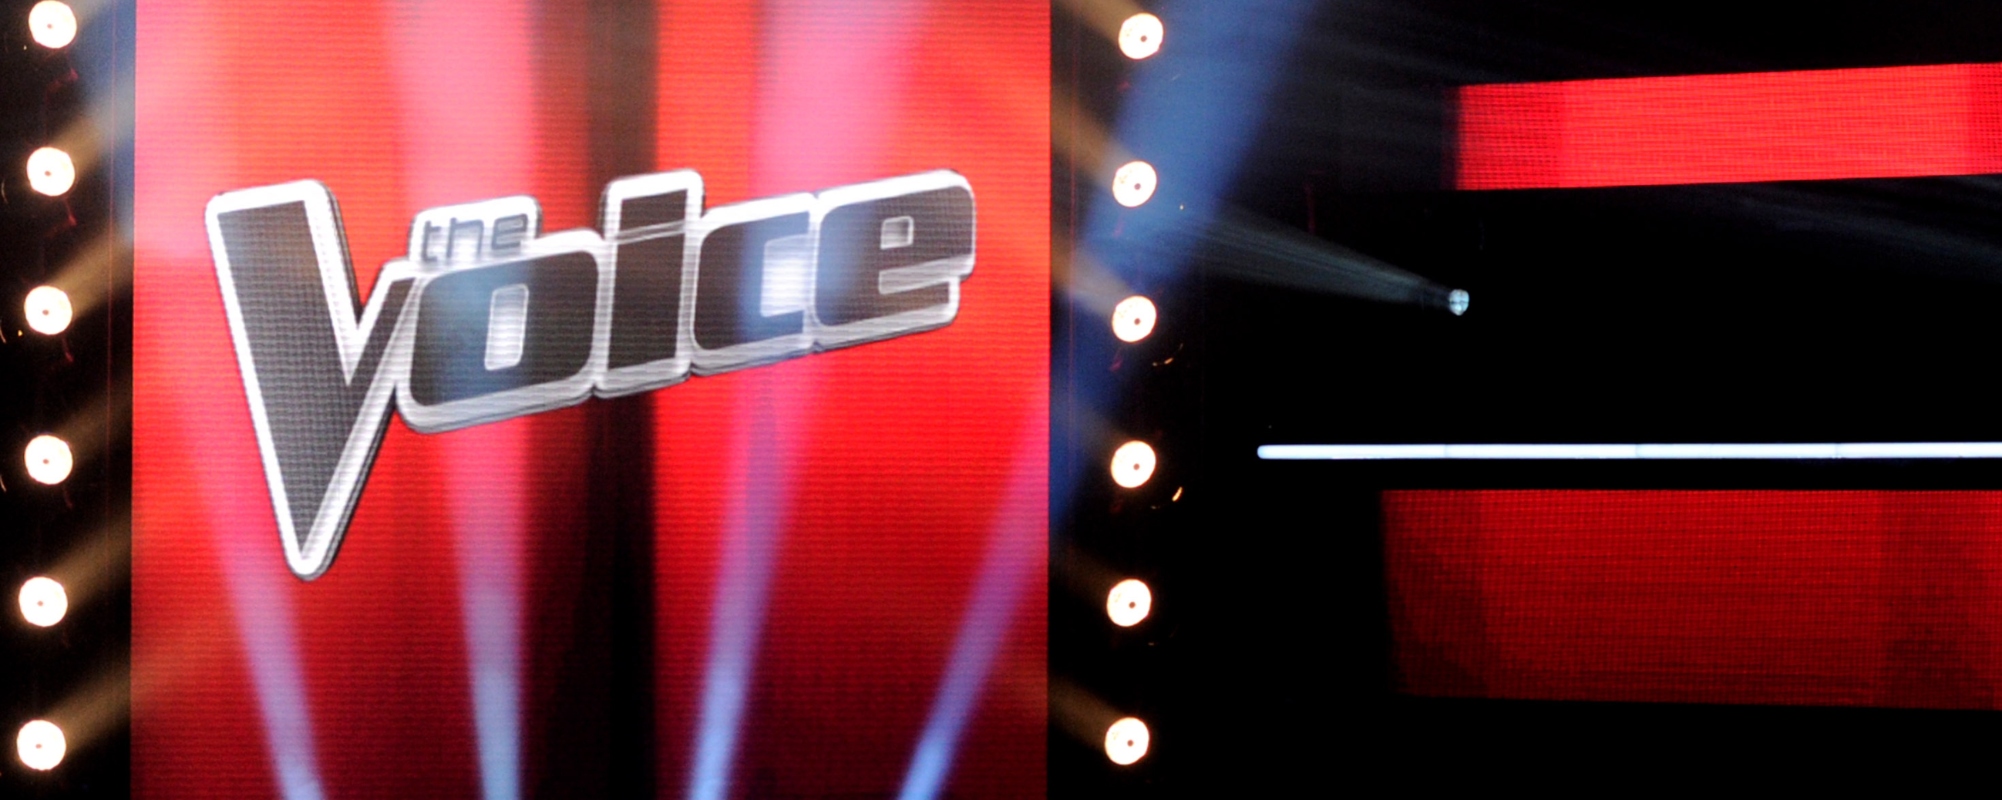 What Time is ‘The Voice’ on Tonight? Tuesday Episode Details for Season 24 Playoffs